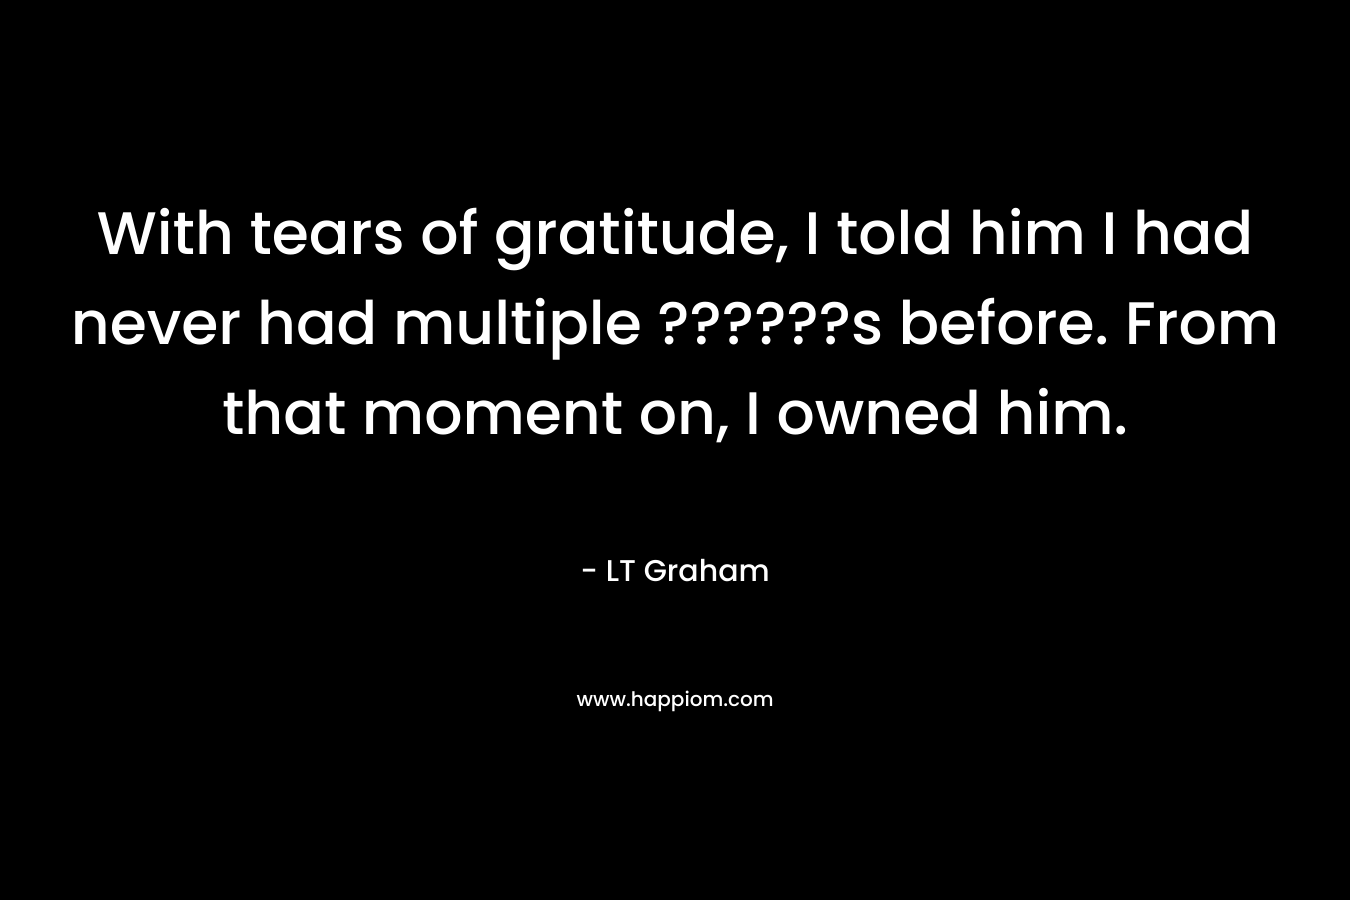 With tears of gratitude, I told him I had never had multiple ??????s before. From that moment on, I owned him. – LT Graham